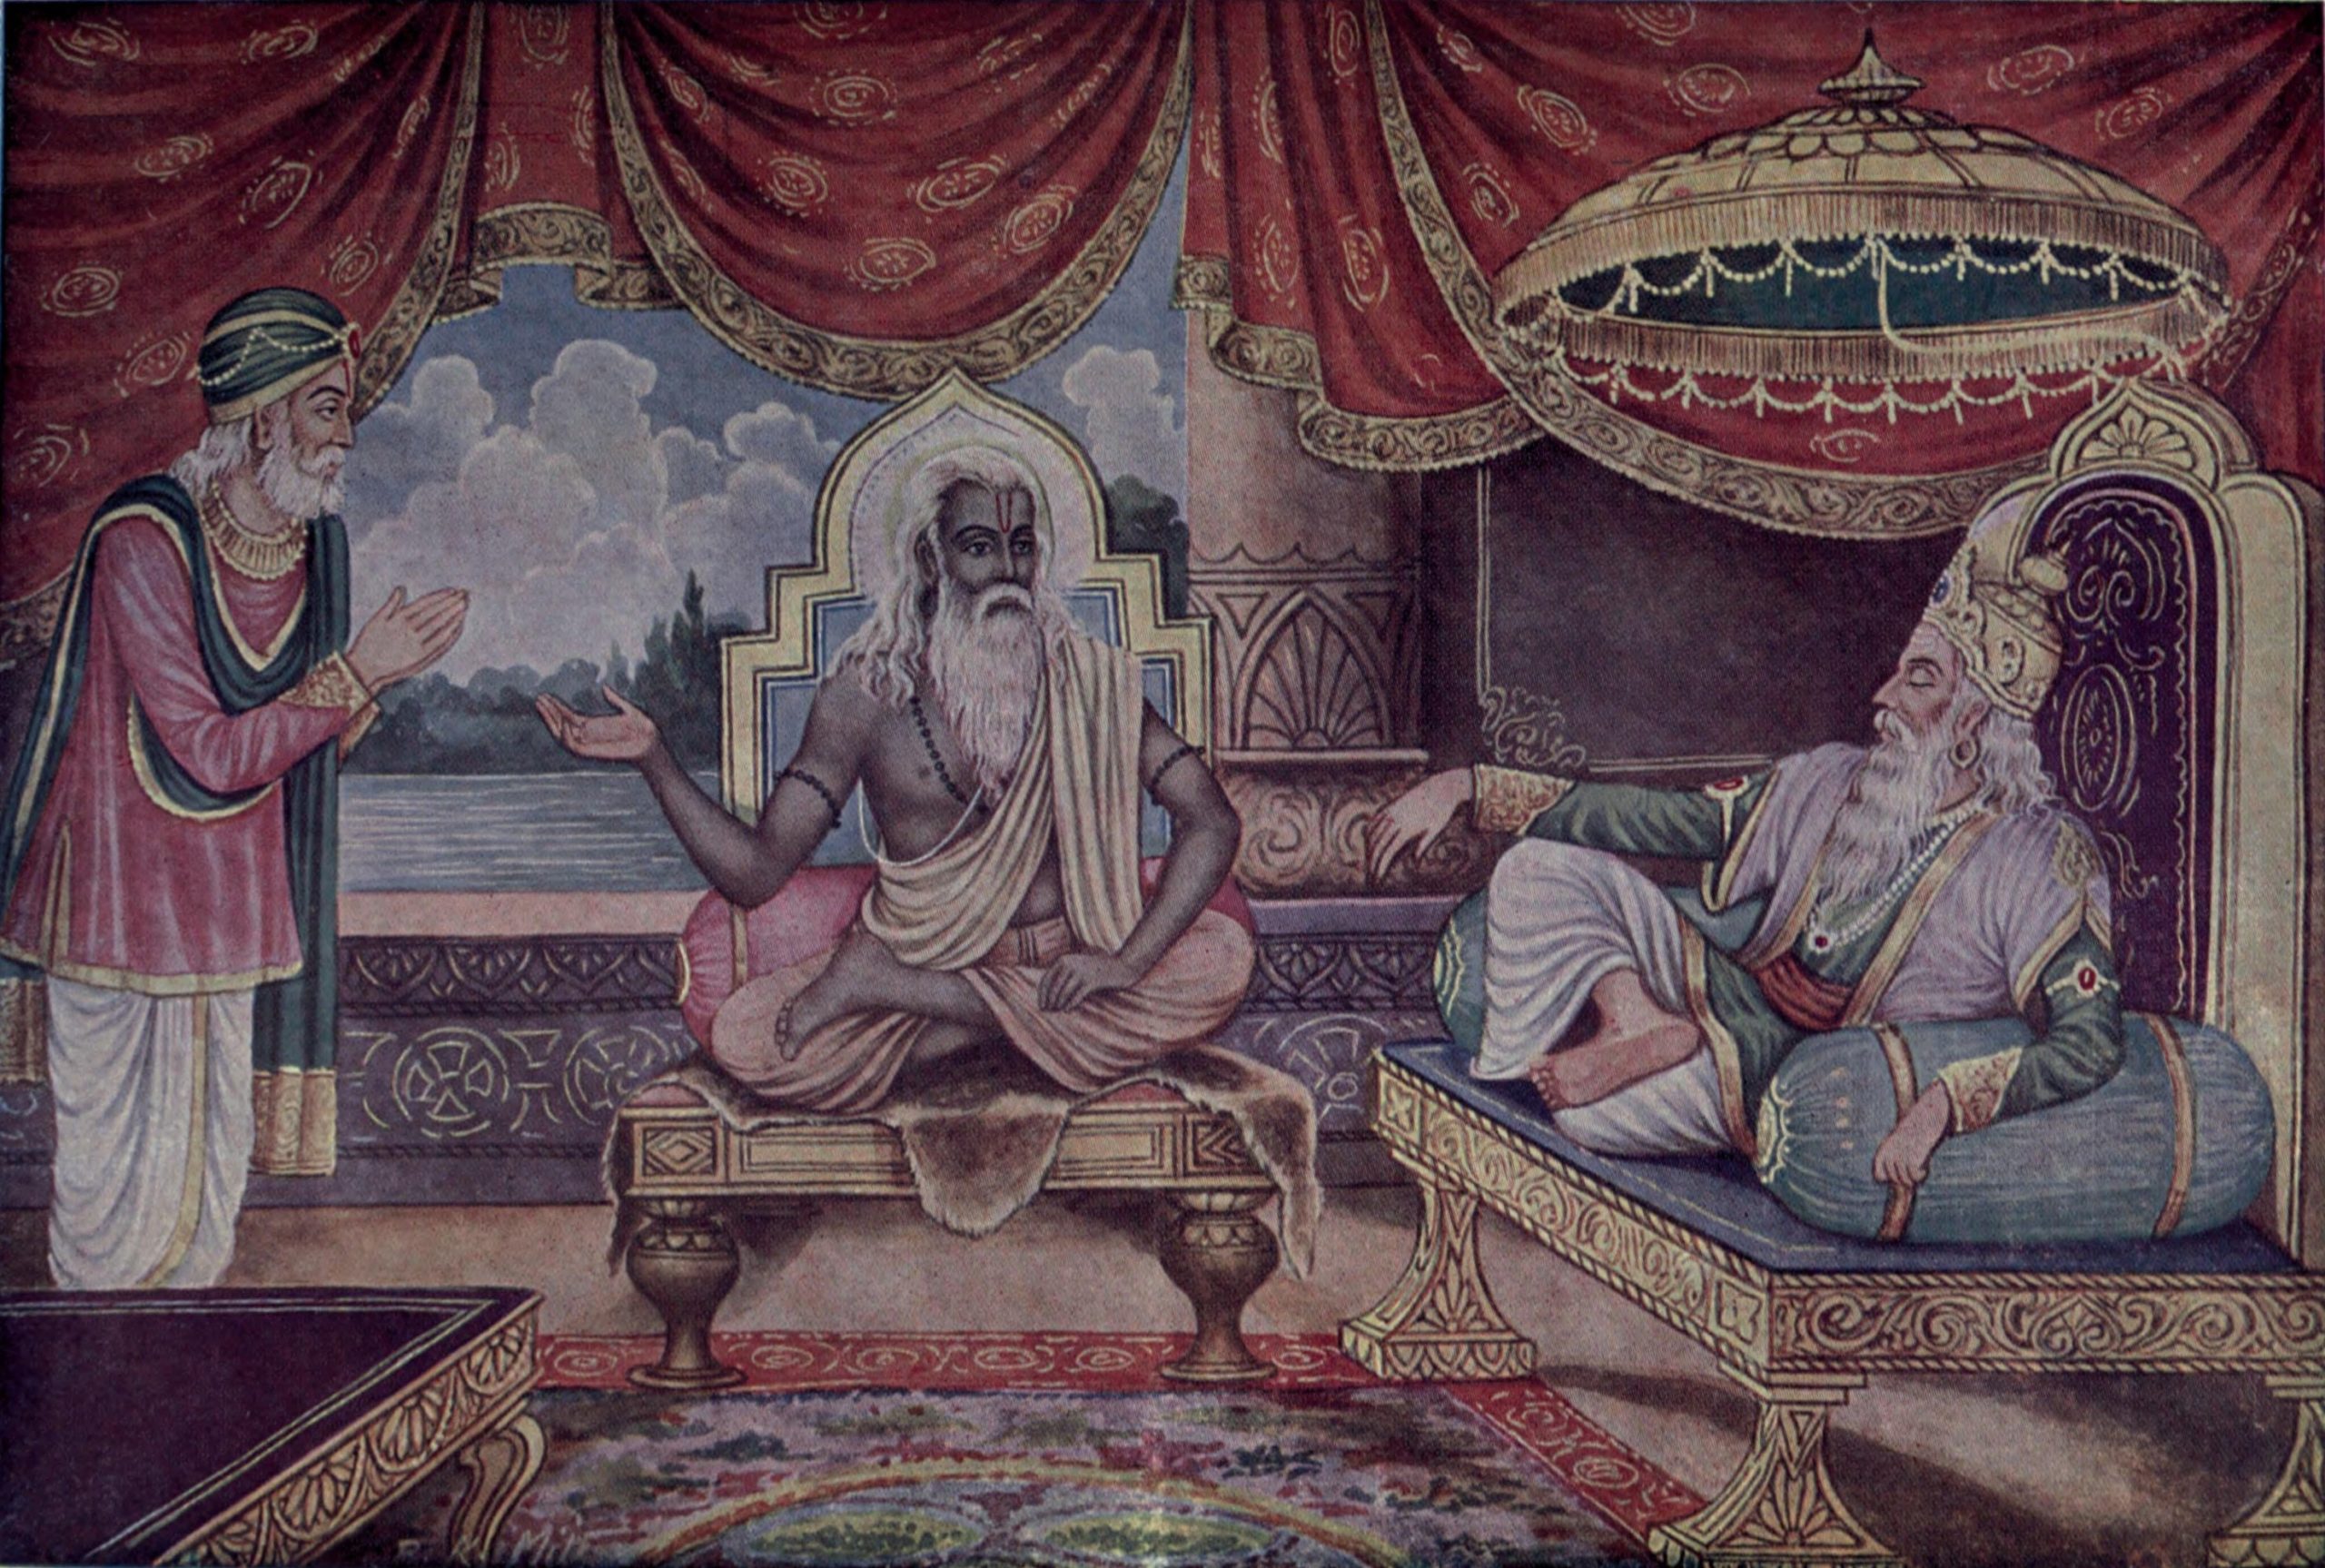 Today, We Answer "How Did Indian Philosophy Come Into Existence?"